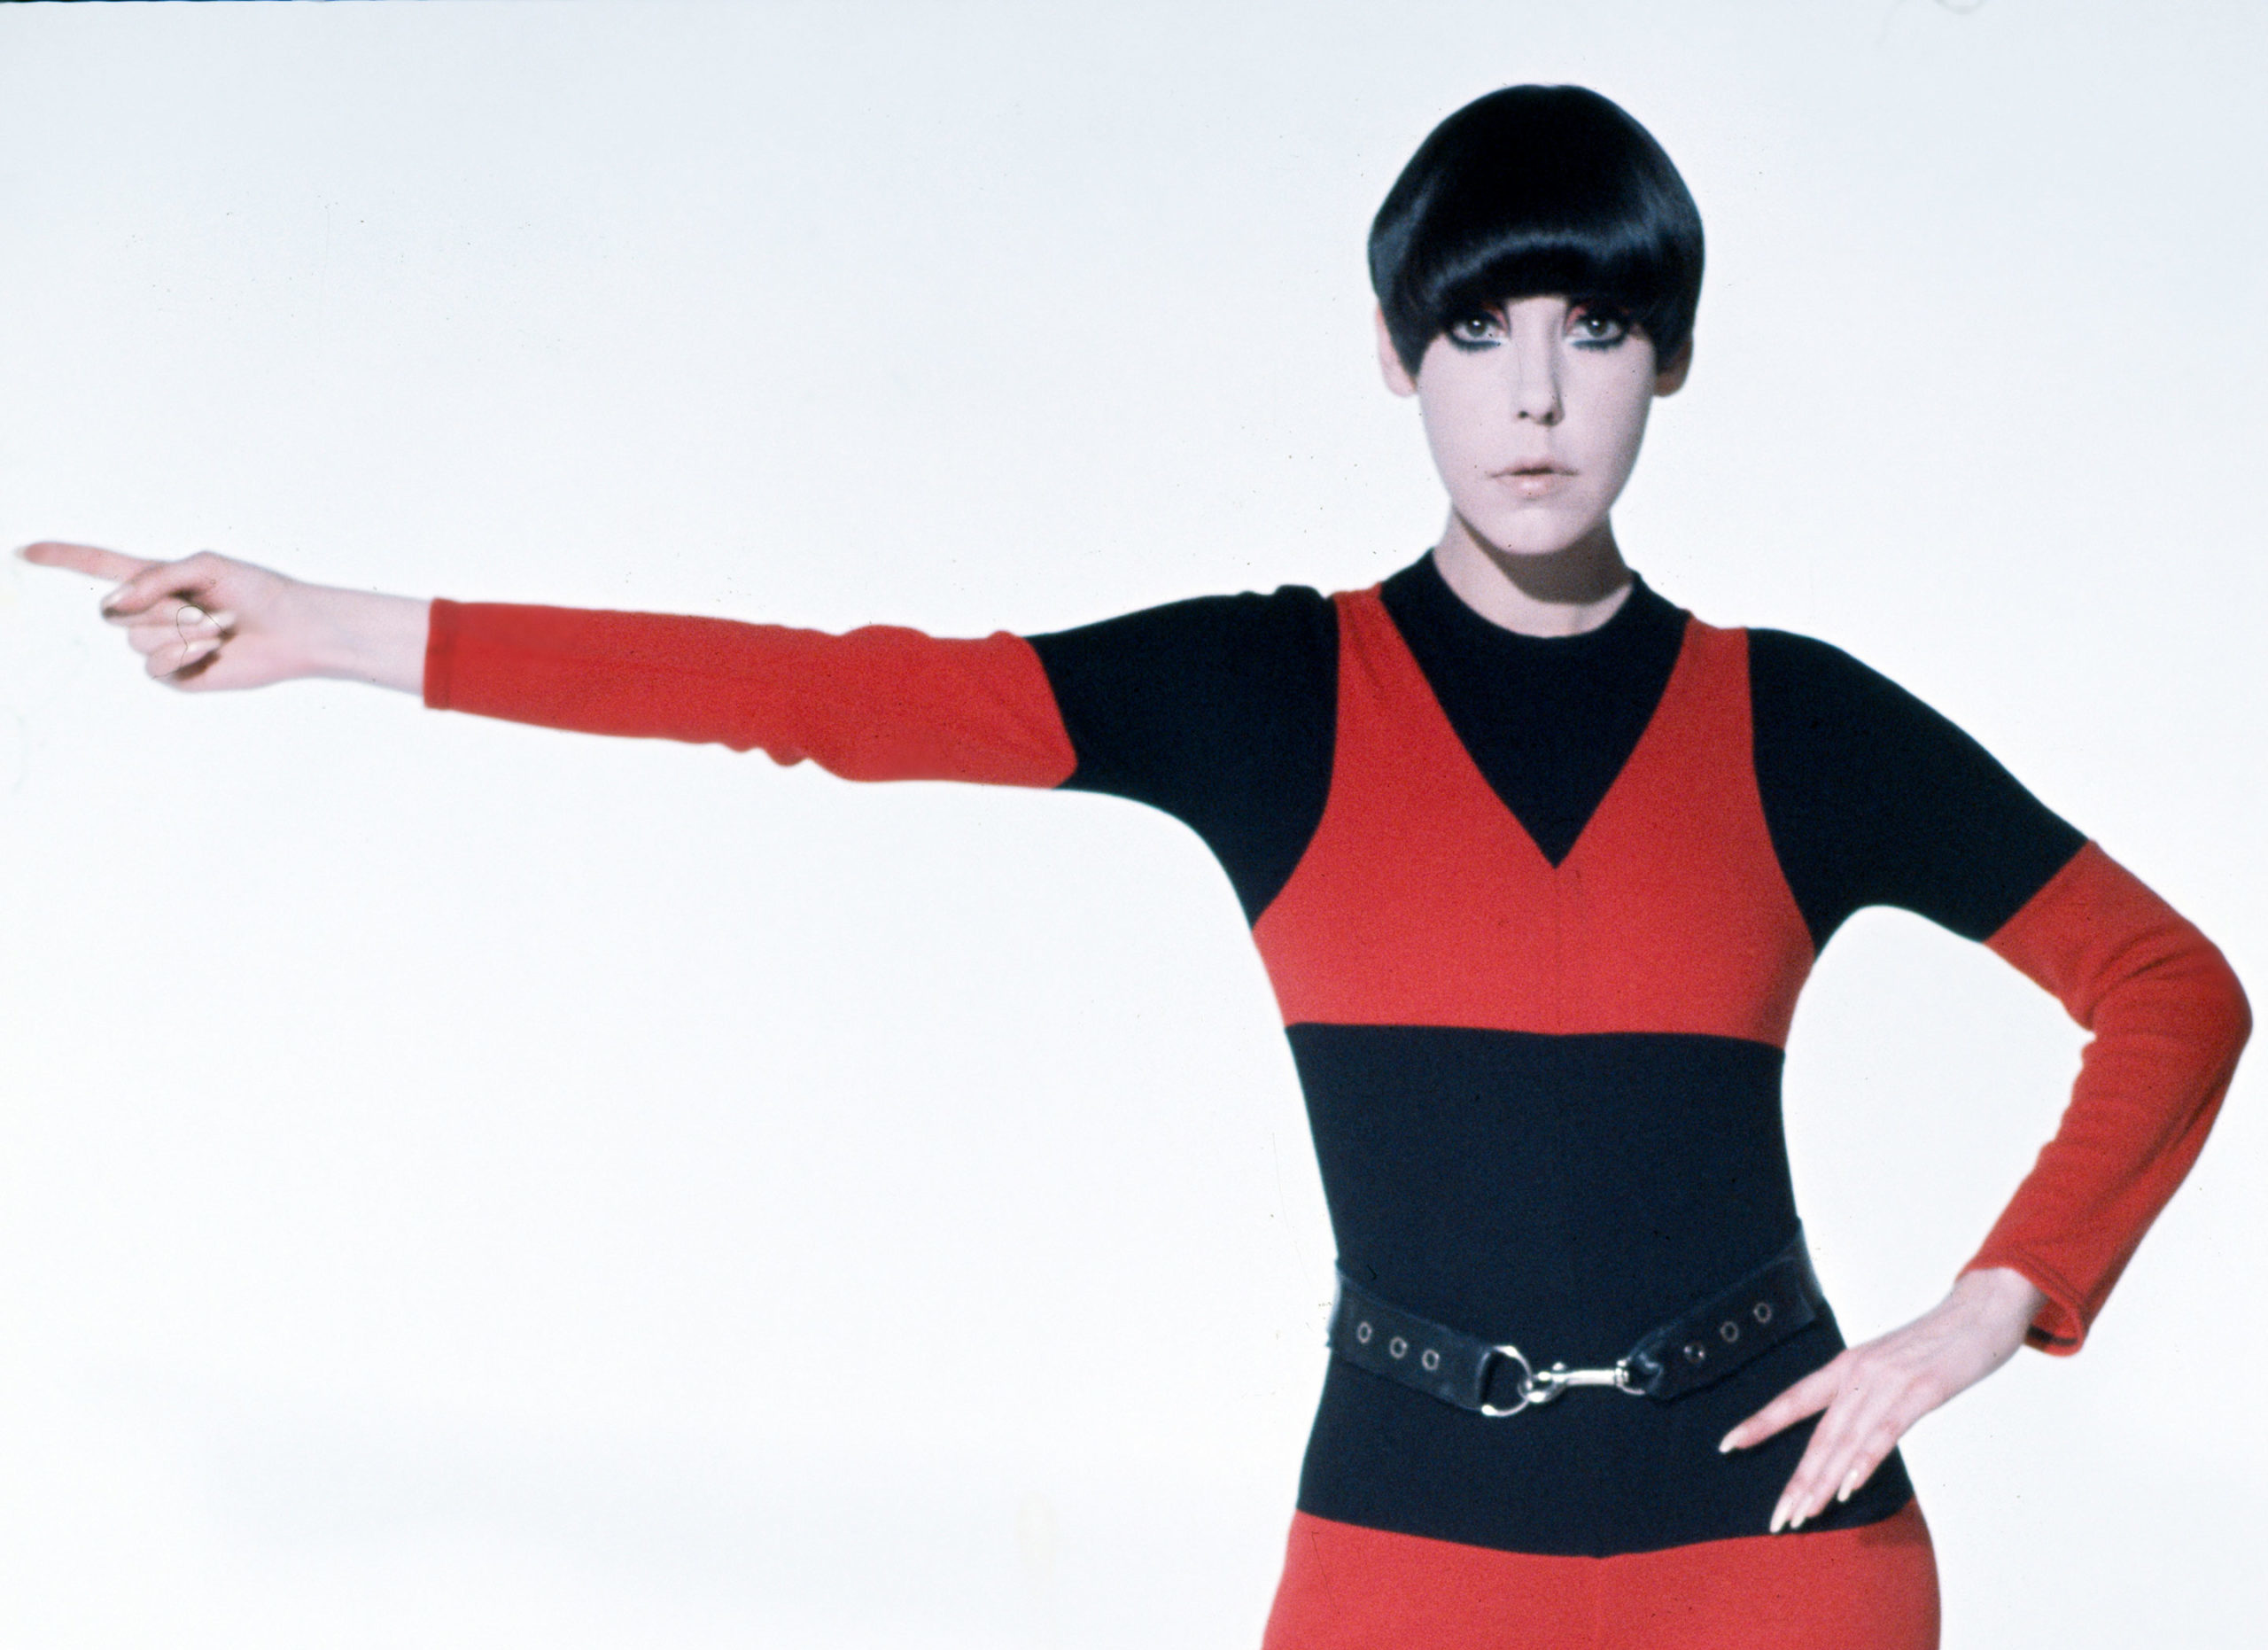 Peggy Moffitt modeling trompe l’oeil ensemble designed by Rudi Gernreich, Resort 1971 collection Photograph © William Claxton, LLC, courtesy of Demont Photo Management & Fahey/Klein Gallery Los Angeles, with permission of the Rudi Gernreich trademark.